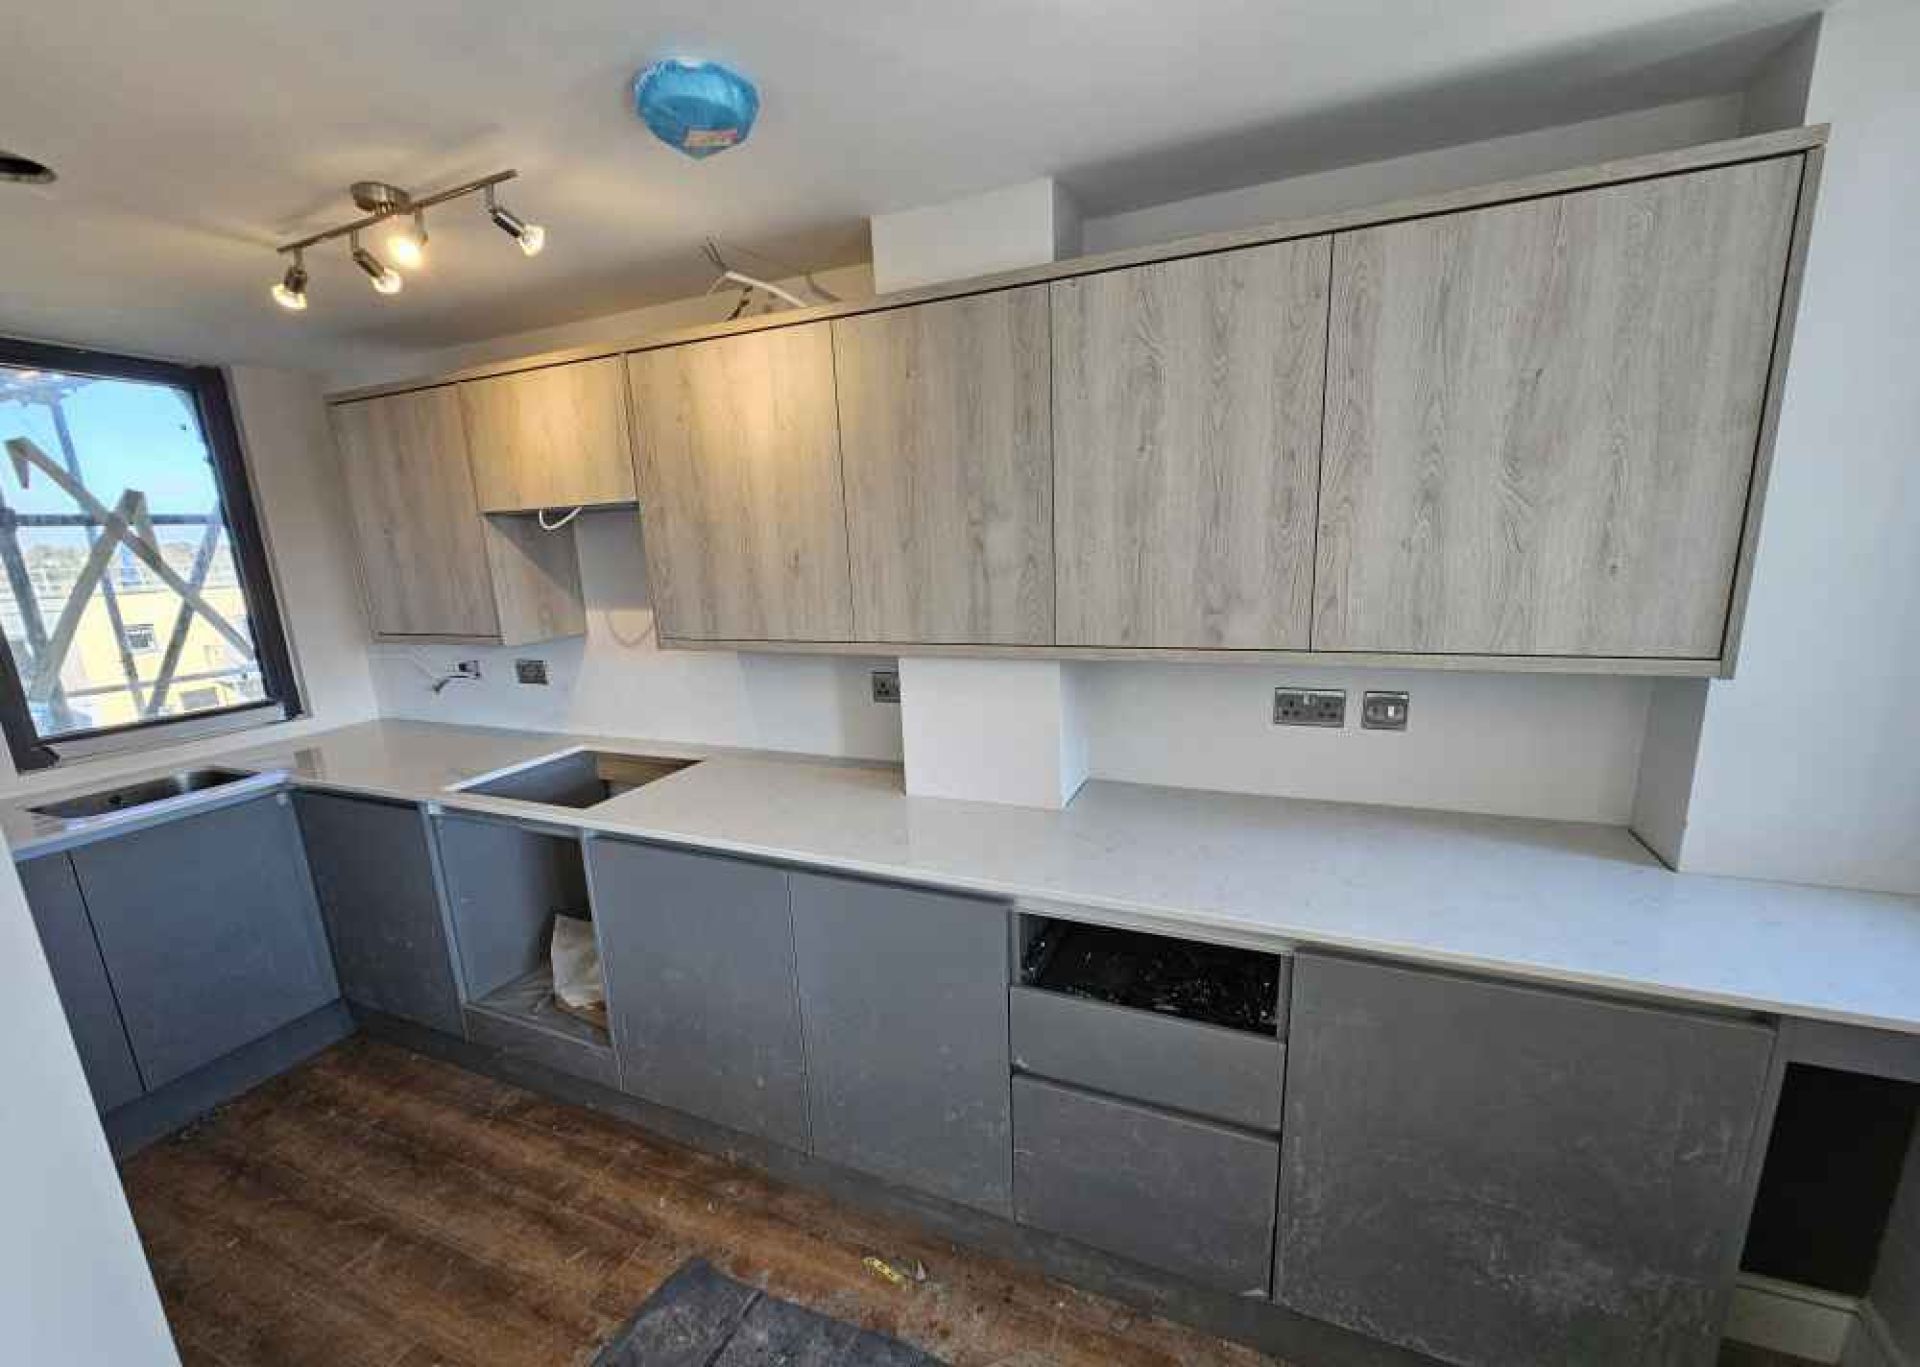 Kitchen area at the halfway stage of development. Cupboards on walls with kitchen top drawers.